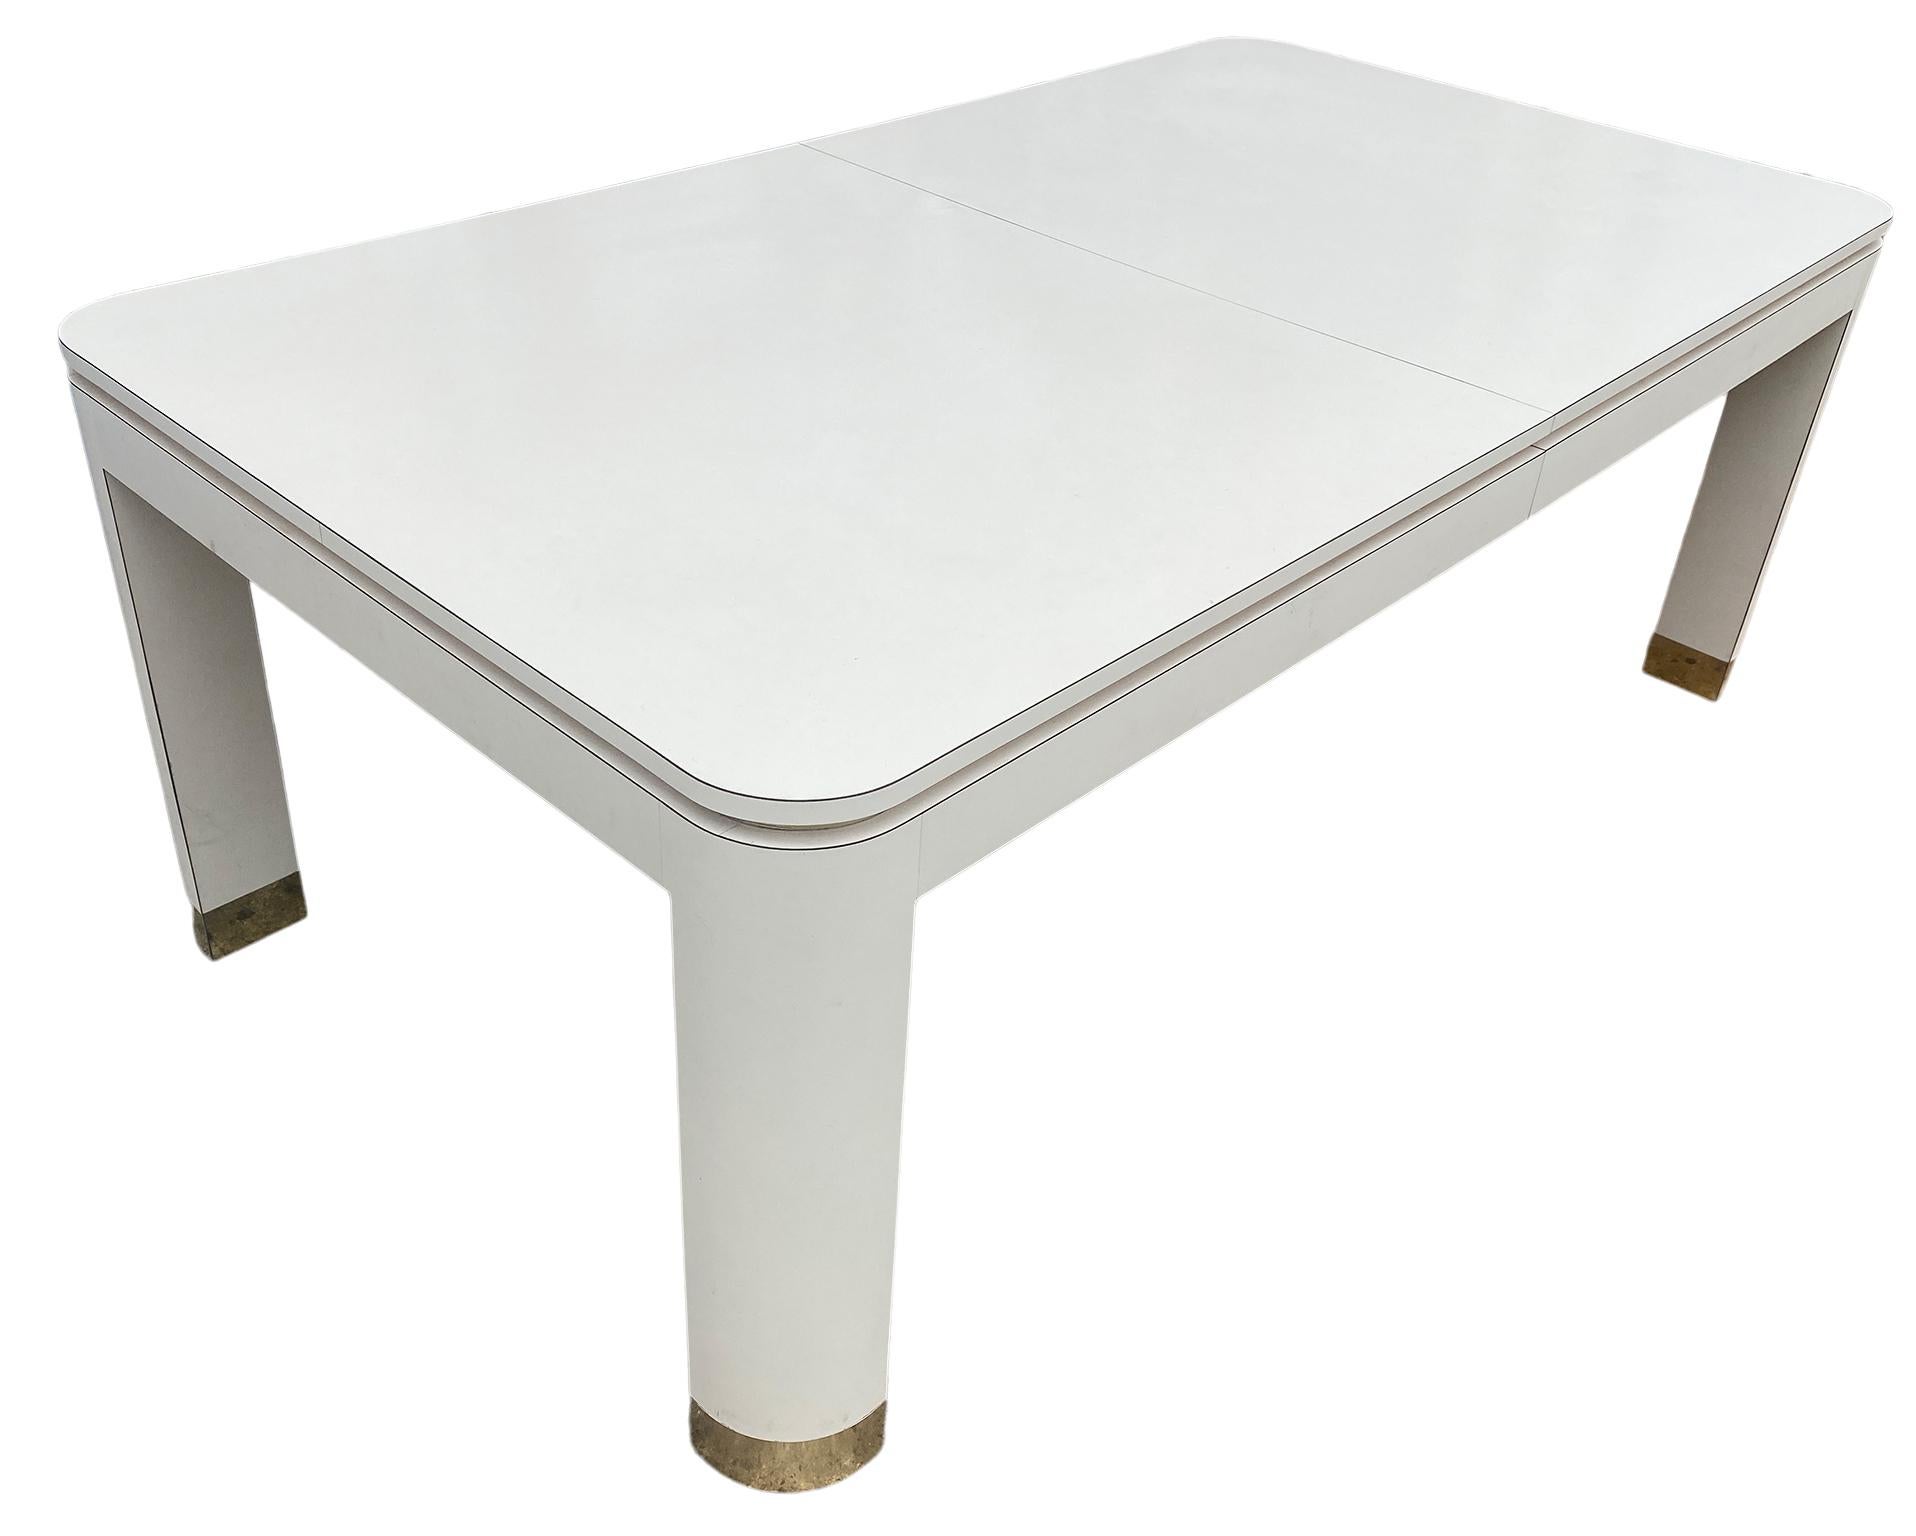 American Mid-Century Modern Massive Cream Brass Laminate Dining Table Style of Pace